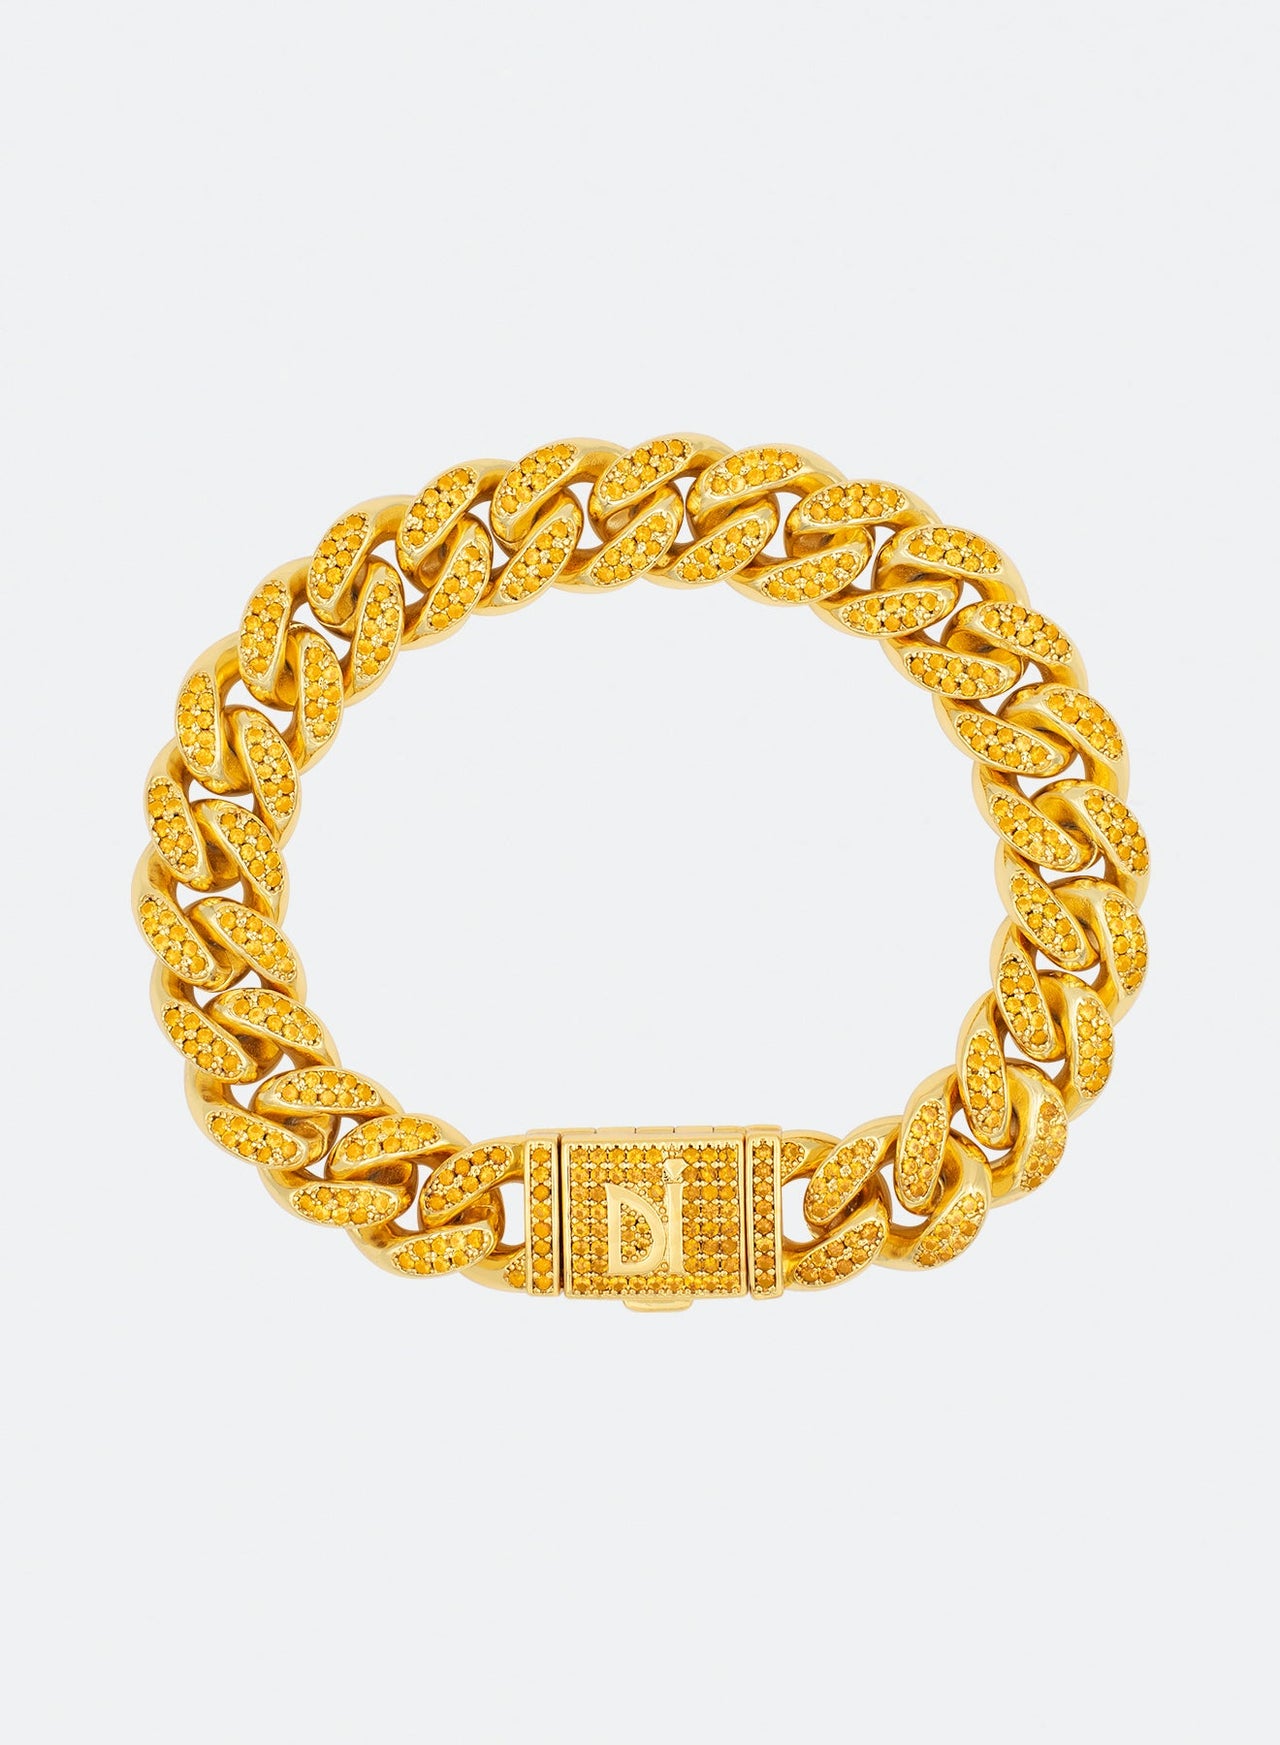 12mm cuban bracelet with 18k gold plated and yellow stones